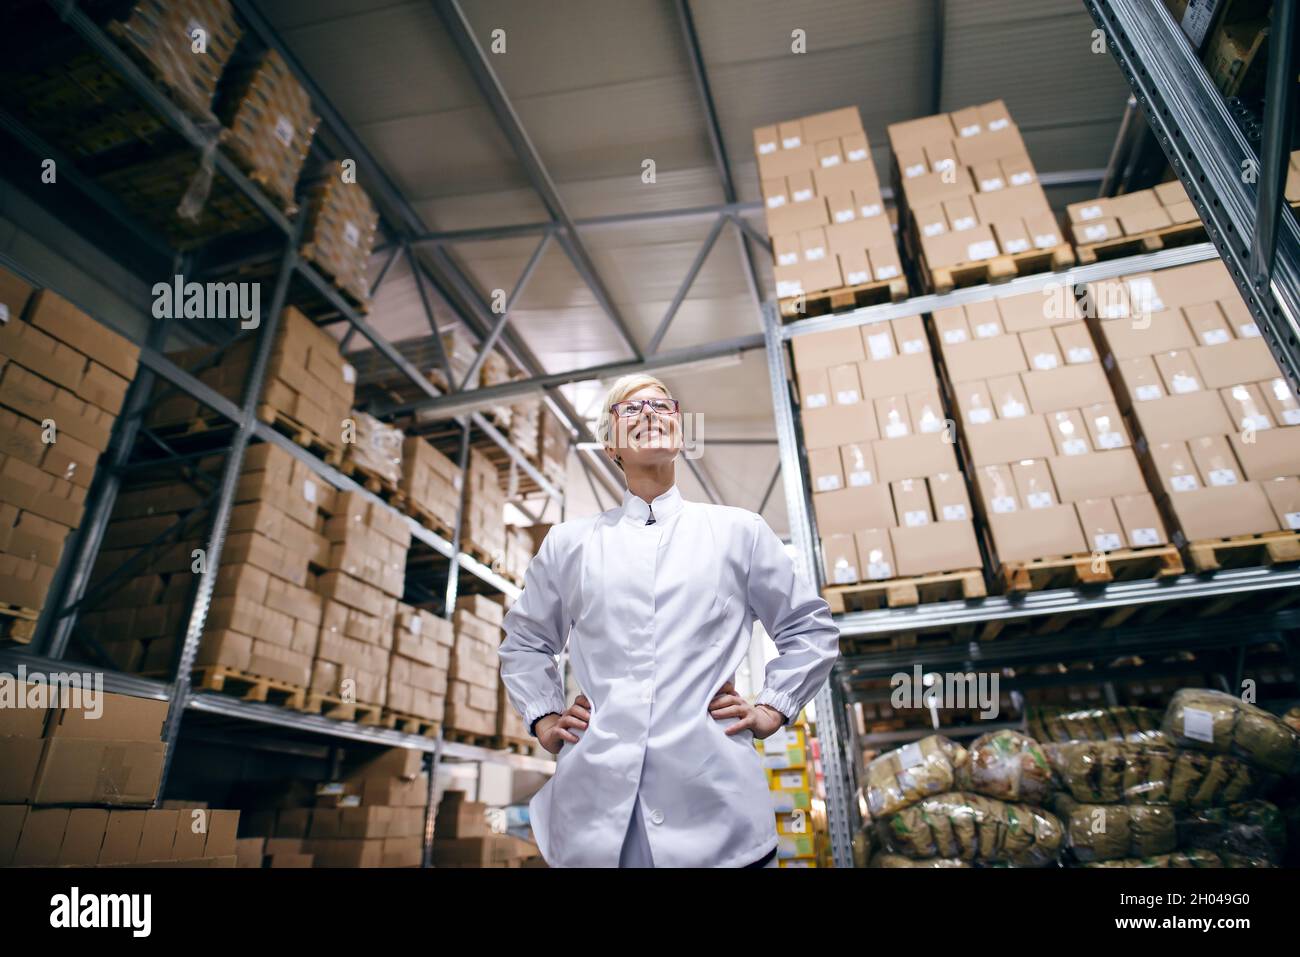 Bottom view of female factory worker standing with hands on hips. Warehouse interior. Stock Photo